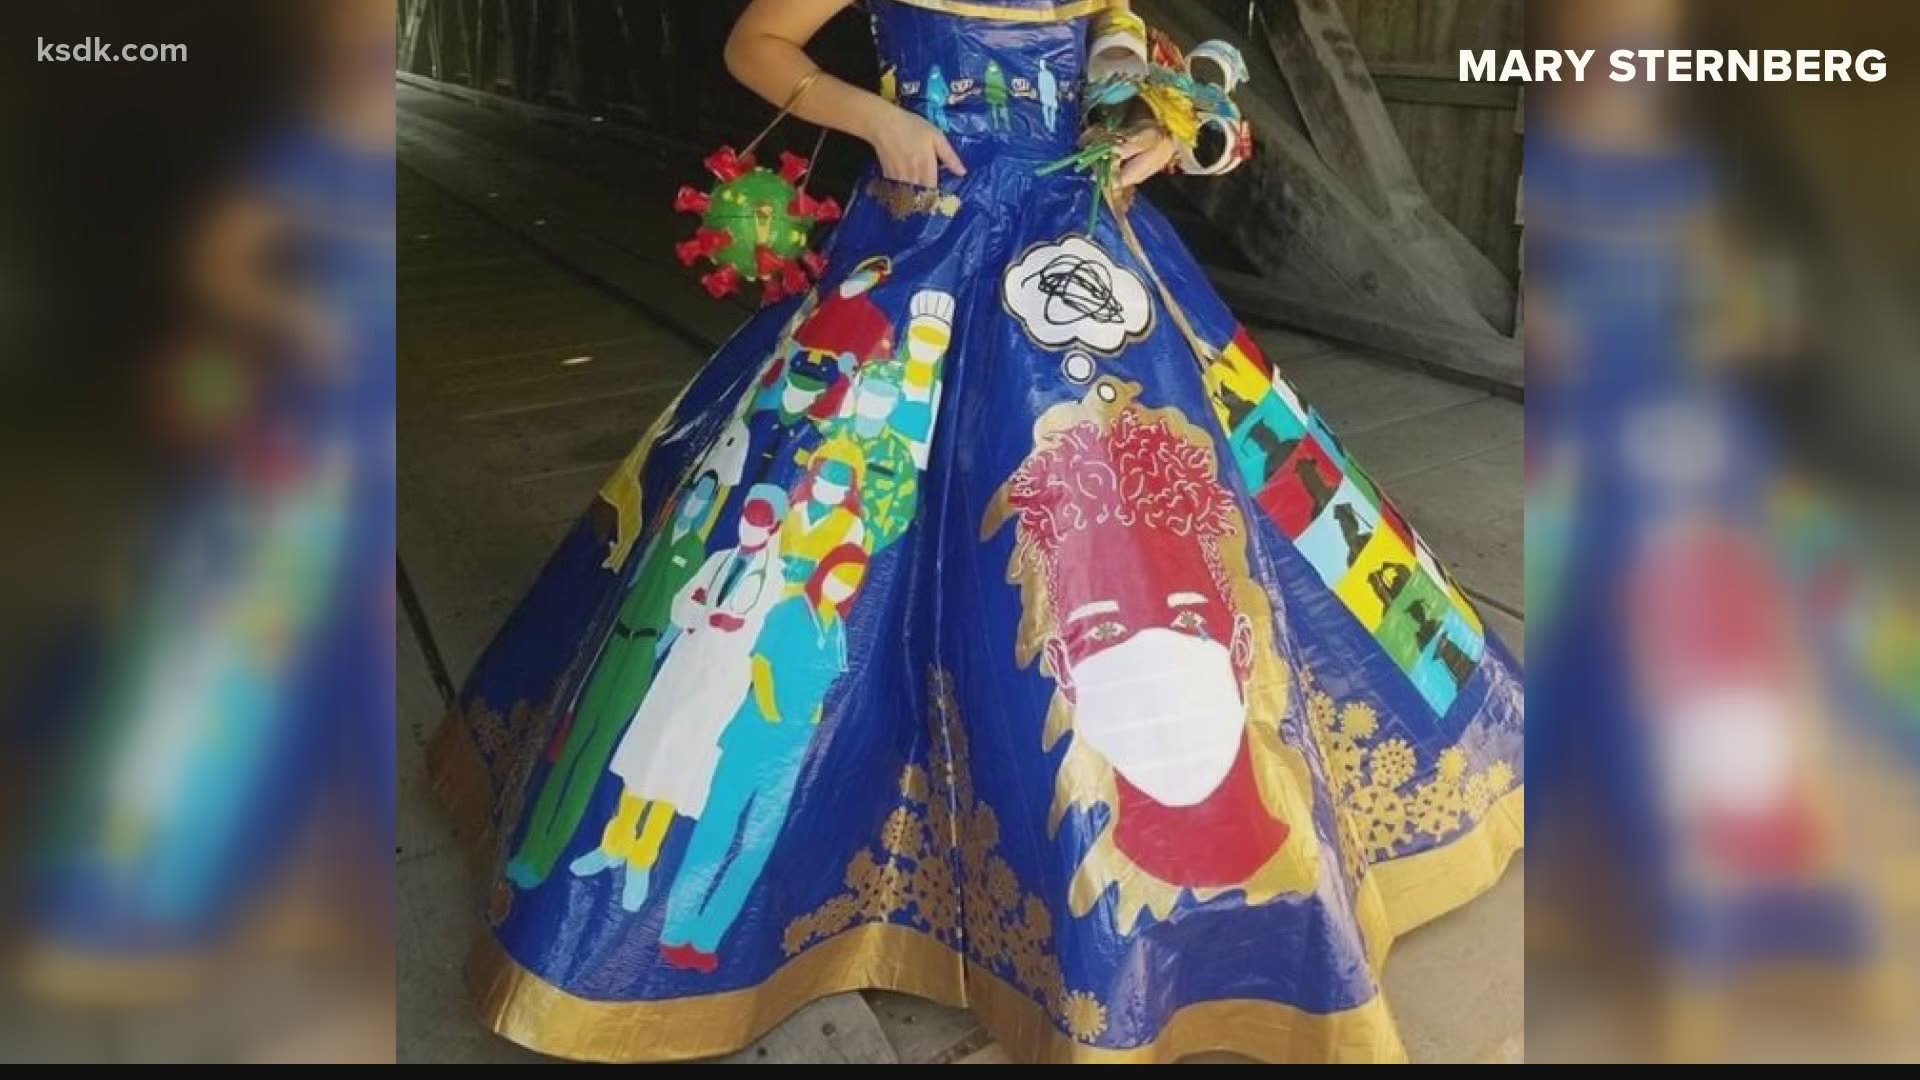 Payton Manker made a dress out of duct tape. Her design includes people wearing masks, doctors and nurses, there's also a nod to the class of 2020.